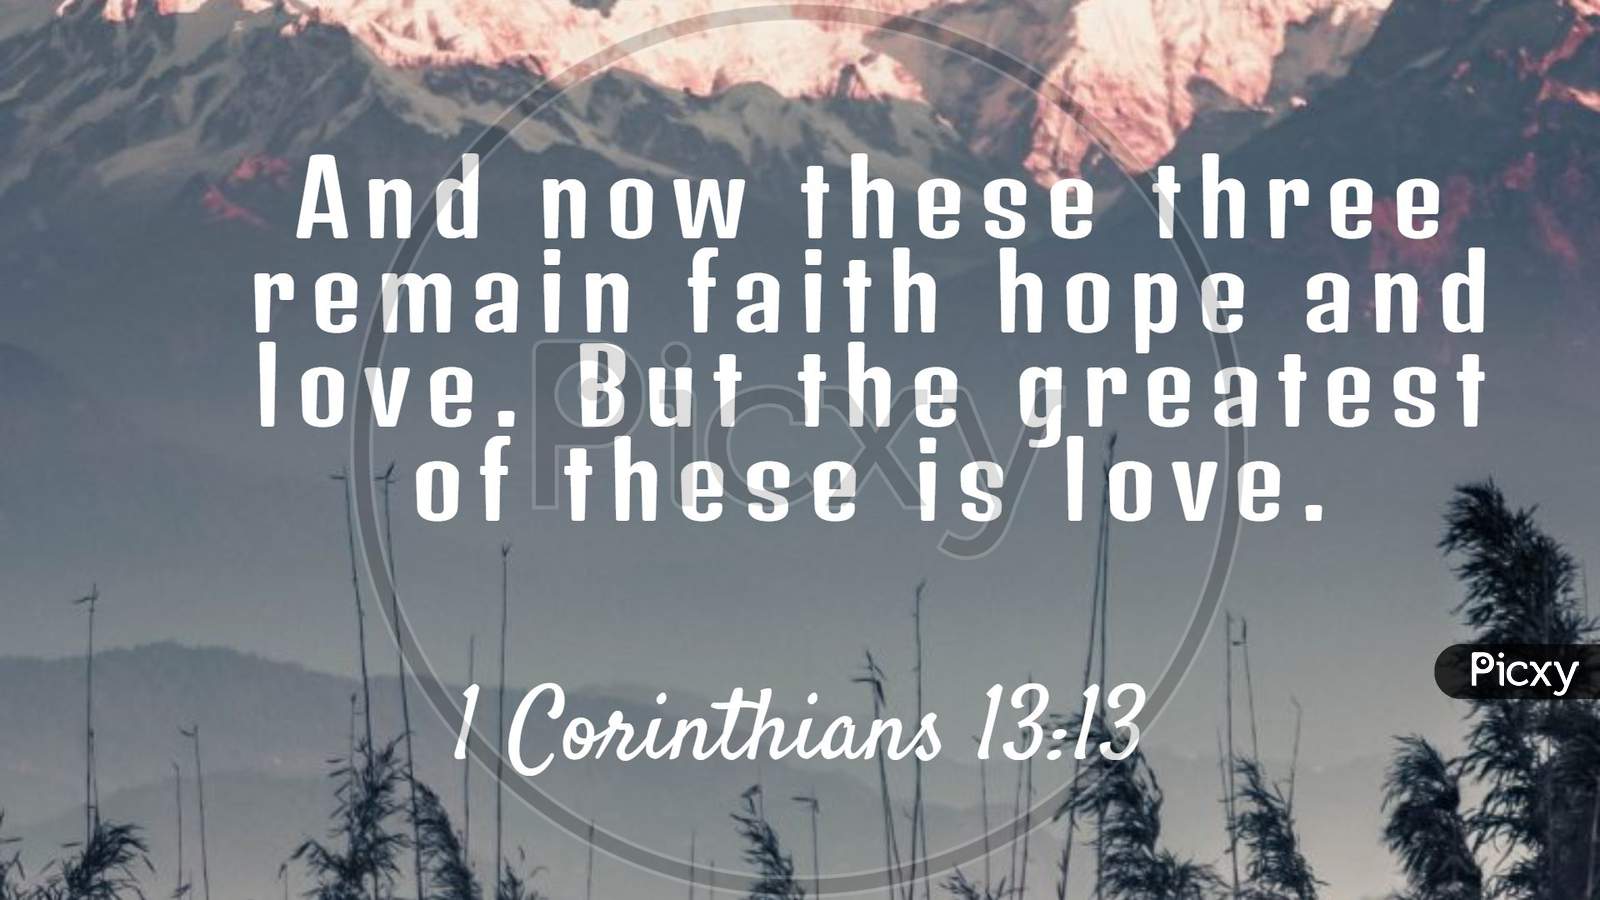 Bible Words  1 Corinthians 13:13 " And Now These Three Remain Faith Hope And Love .But The Greatest Of These Is Love "